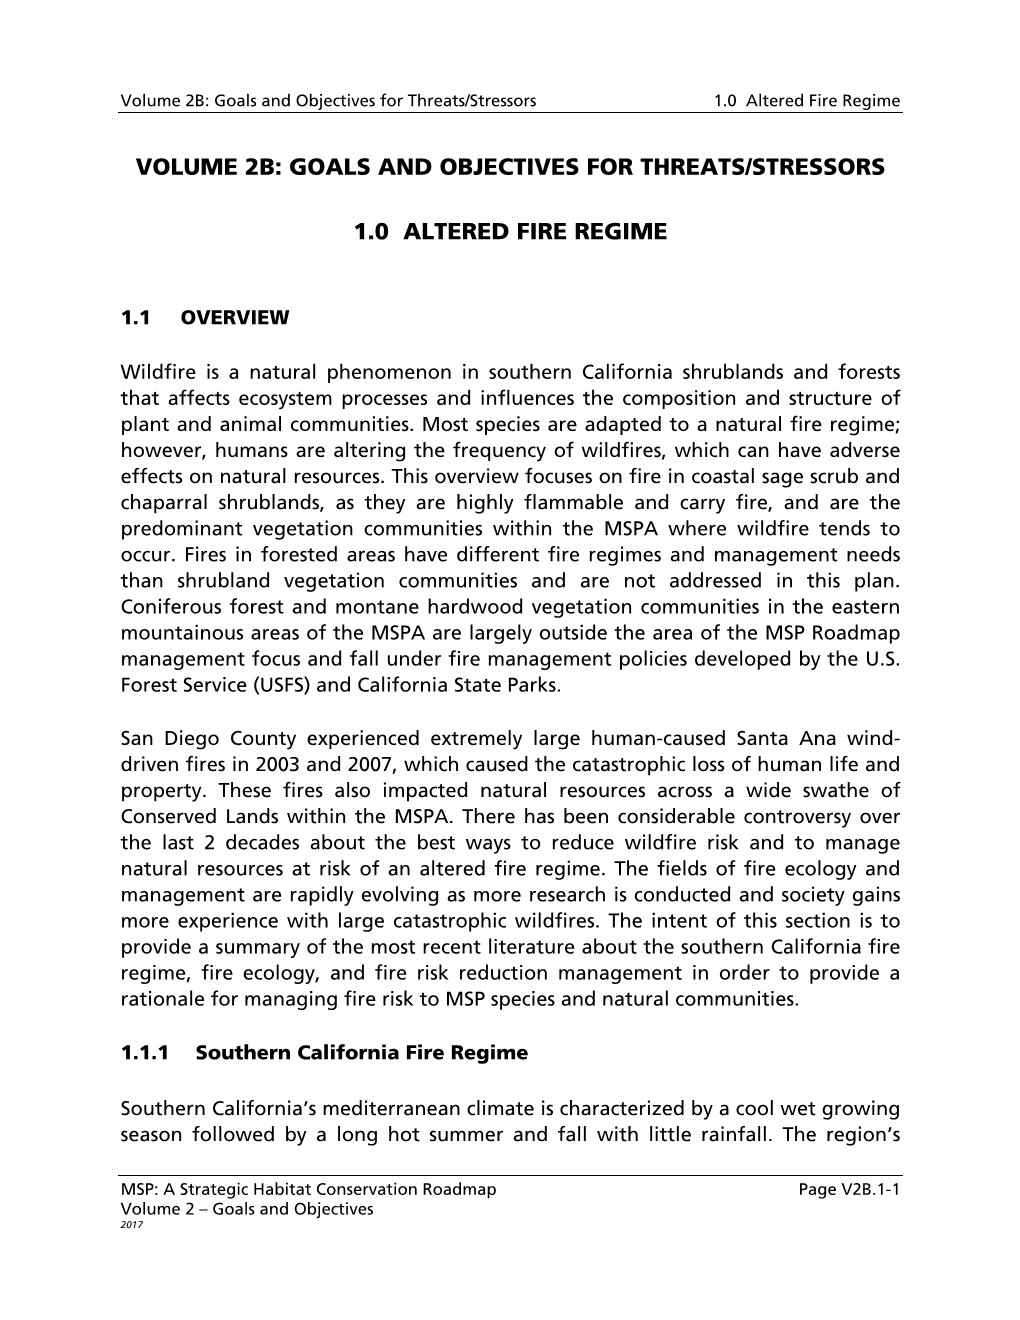 Goals and Objectives for Threats/Stressors 1.0 Altered Fire Regime